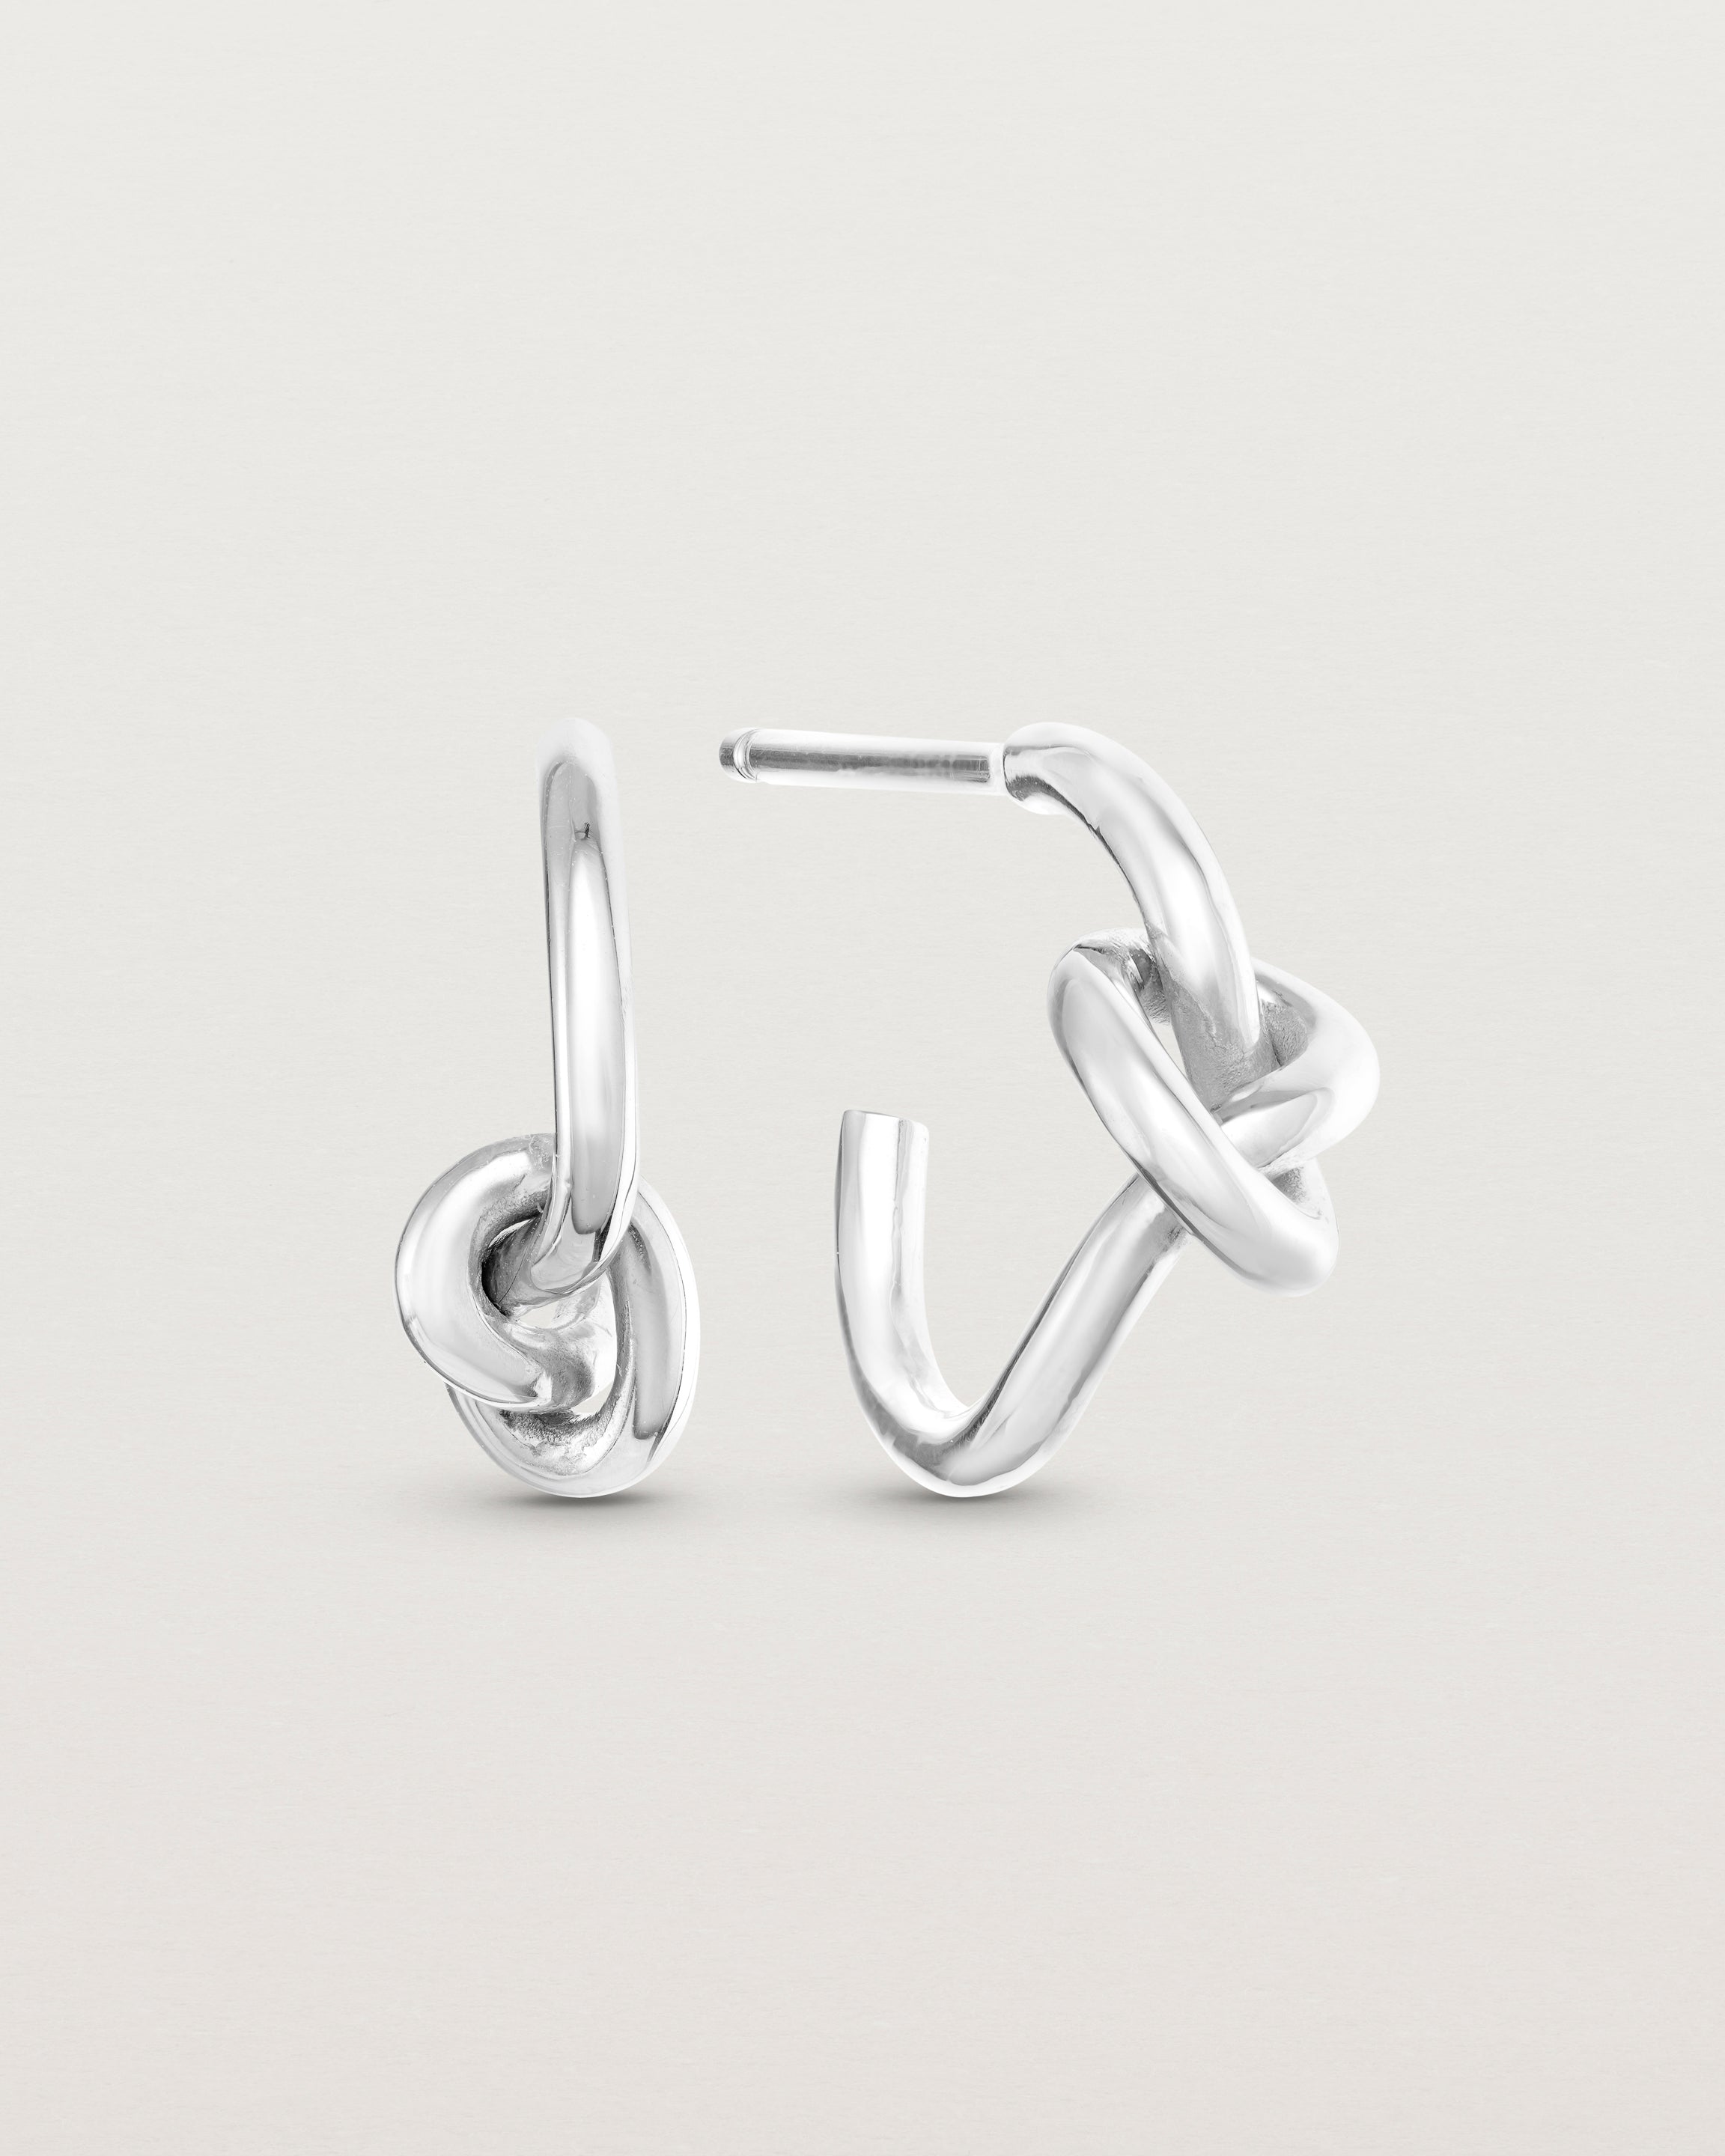 A pair of Dà anam Hoops in sterling silver.